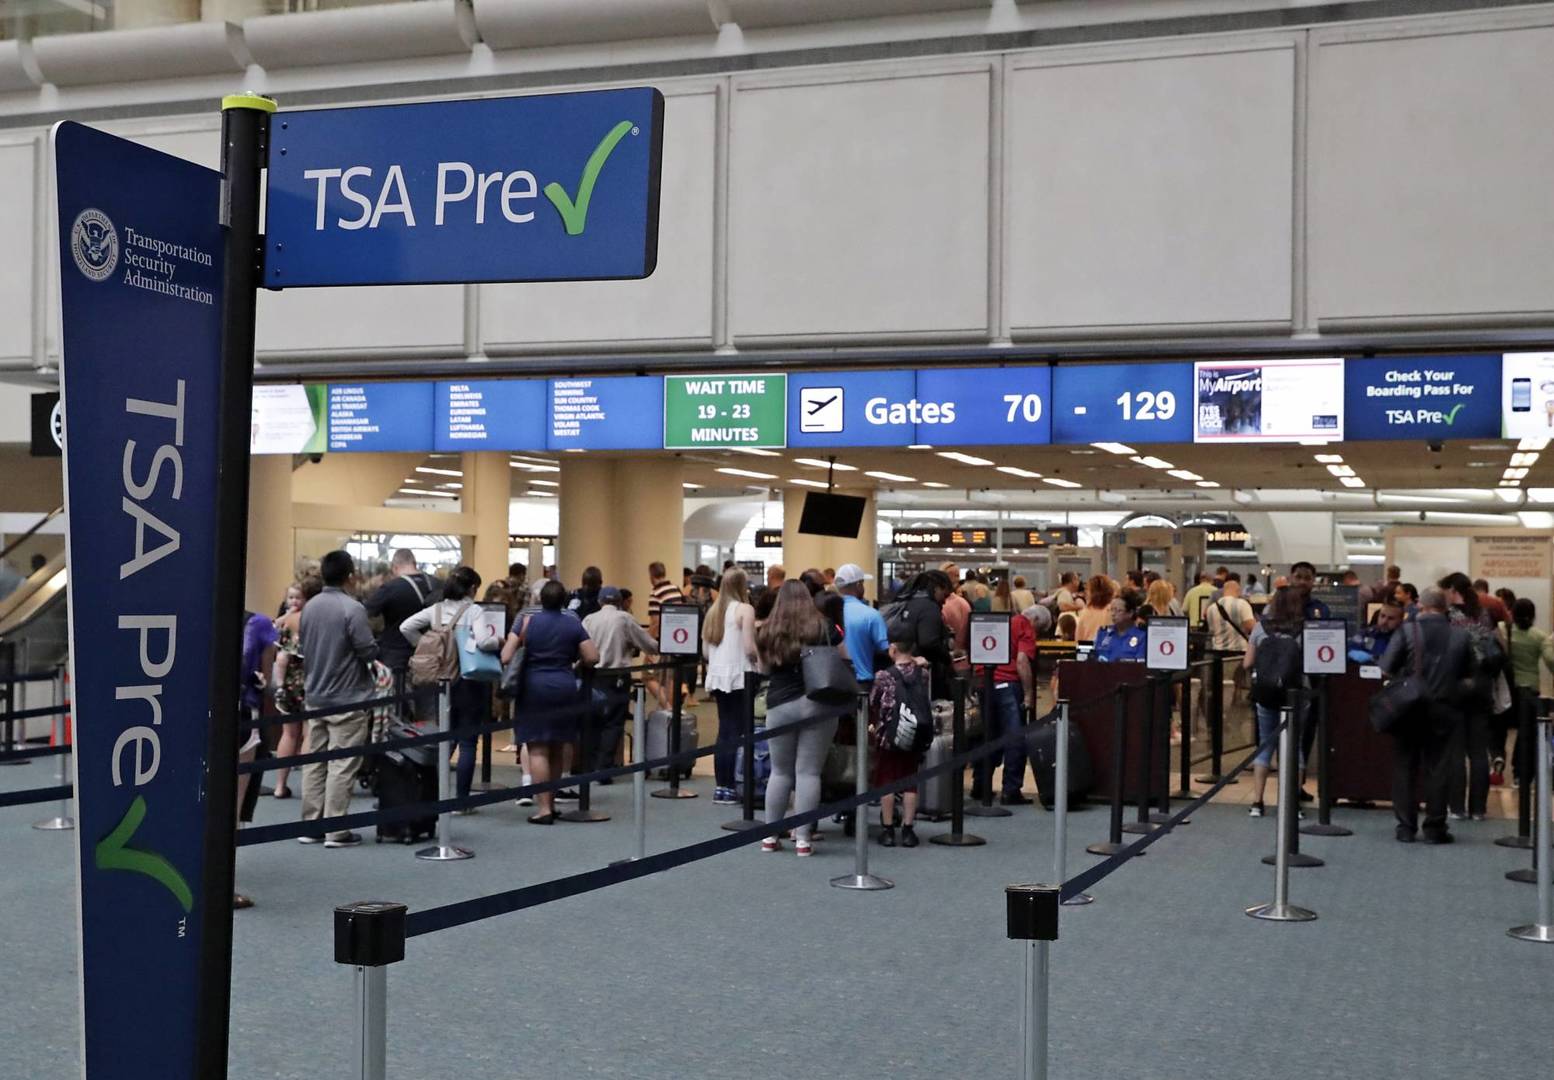 FILE- In this Thursday, June 21, 2018 photo, air passengers heading to their departure gates enter TSA pre-check before going through security screening at Orlando International Airport, in Orlando, Fla. Investigators were unable to corroborate specific allegations that a Transportation Security Administration supervisor instructed air marshals to racially discriminate against passengers at Florida's busiest airport. But investigators for the Department of Homeland Security's Office of Inspector General uncovered other concerns about racial profiling of passengers by other TSA supervisors at Orlando International Airport, according to a report sent to lawmakers last week. (AP Photo/John Raoux)